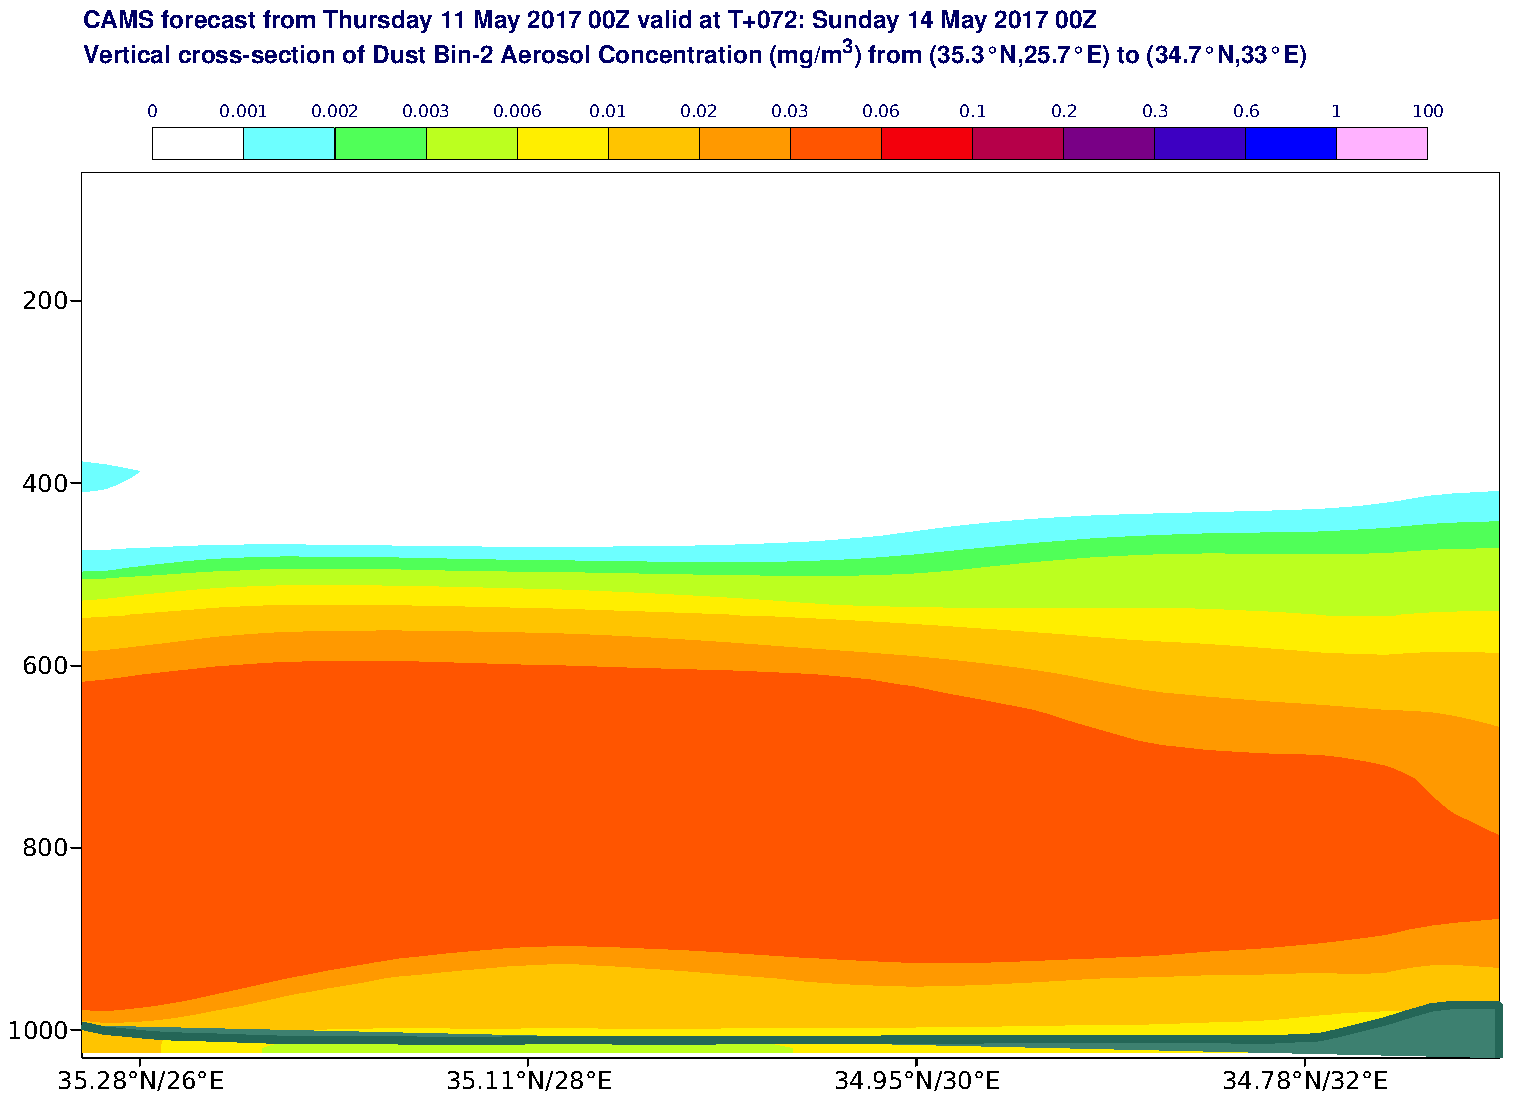 Vertical cross-section of Dust Bin-2 Aerosol Concentration (mg/m3) valid at T72 - 2017-05-14 00:00